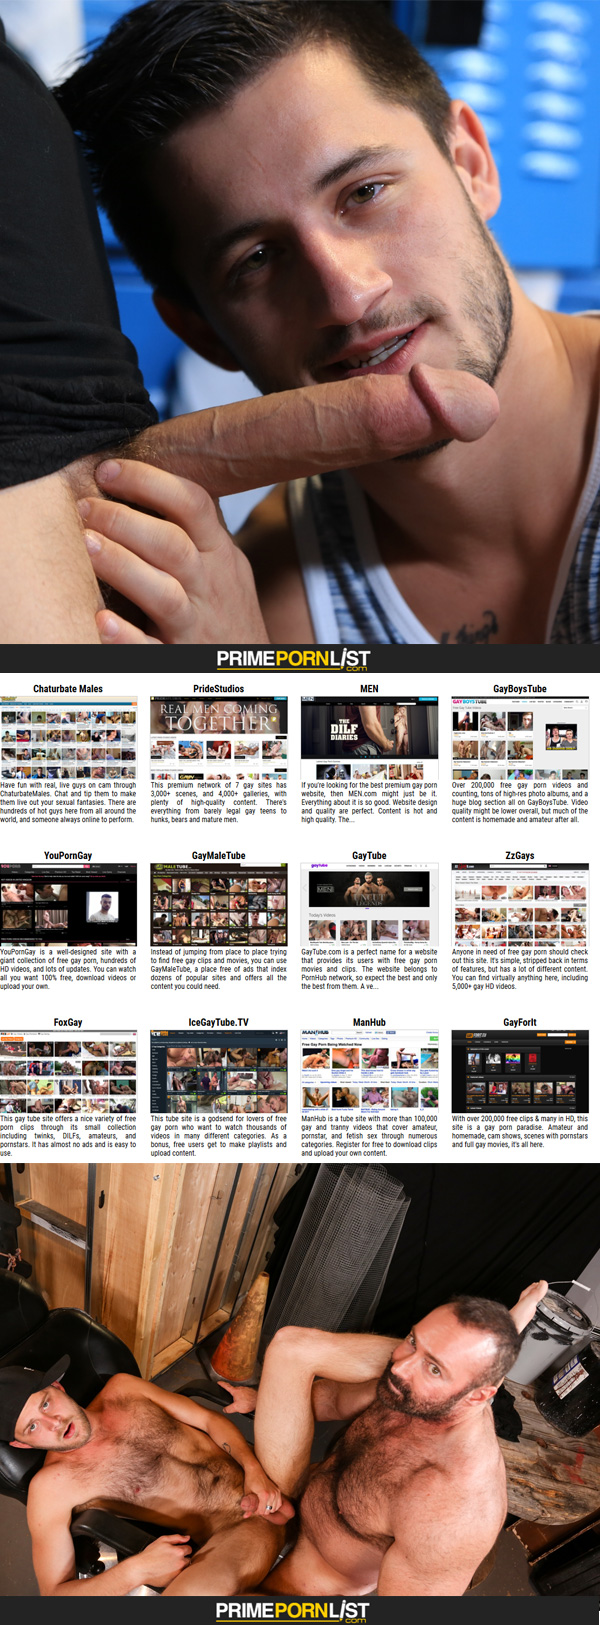 Prime Porn List - Your Favorites Sites Ranked and Categorized photo